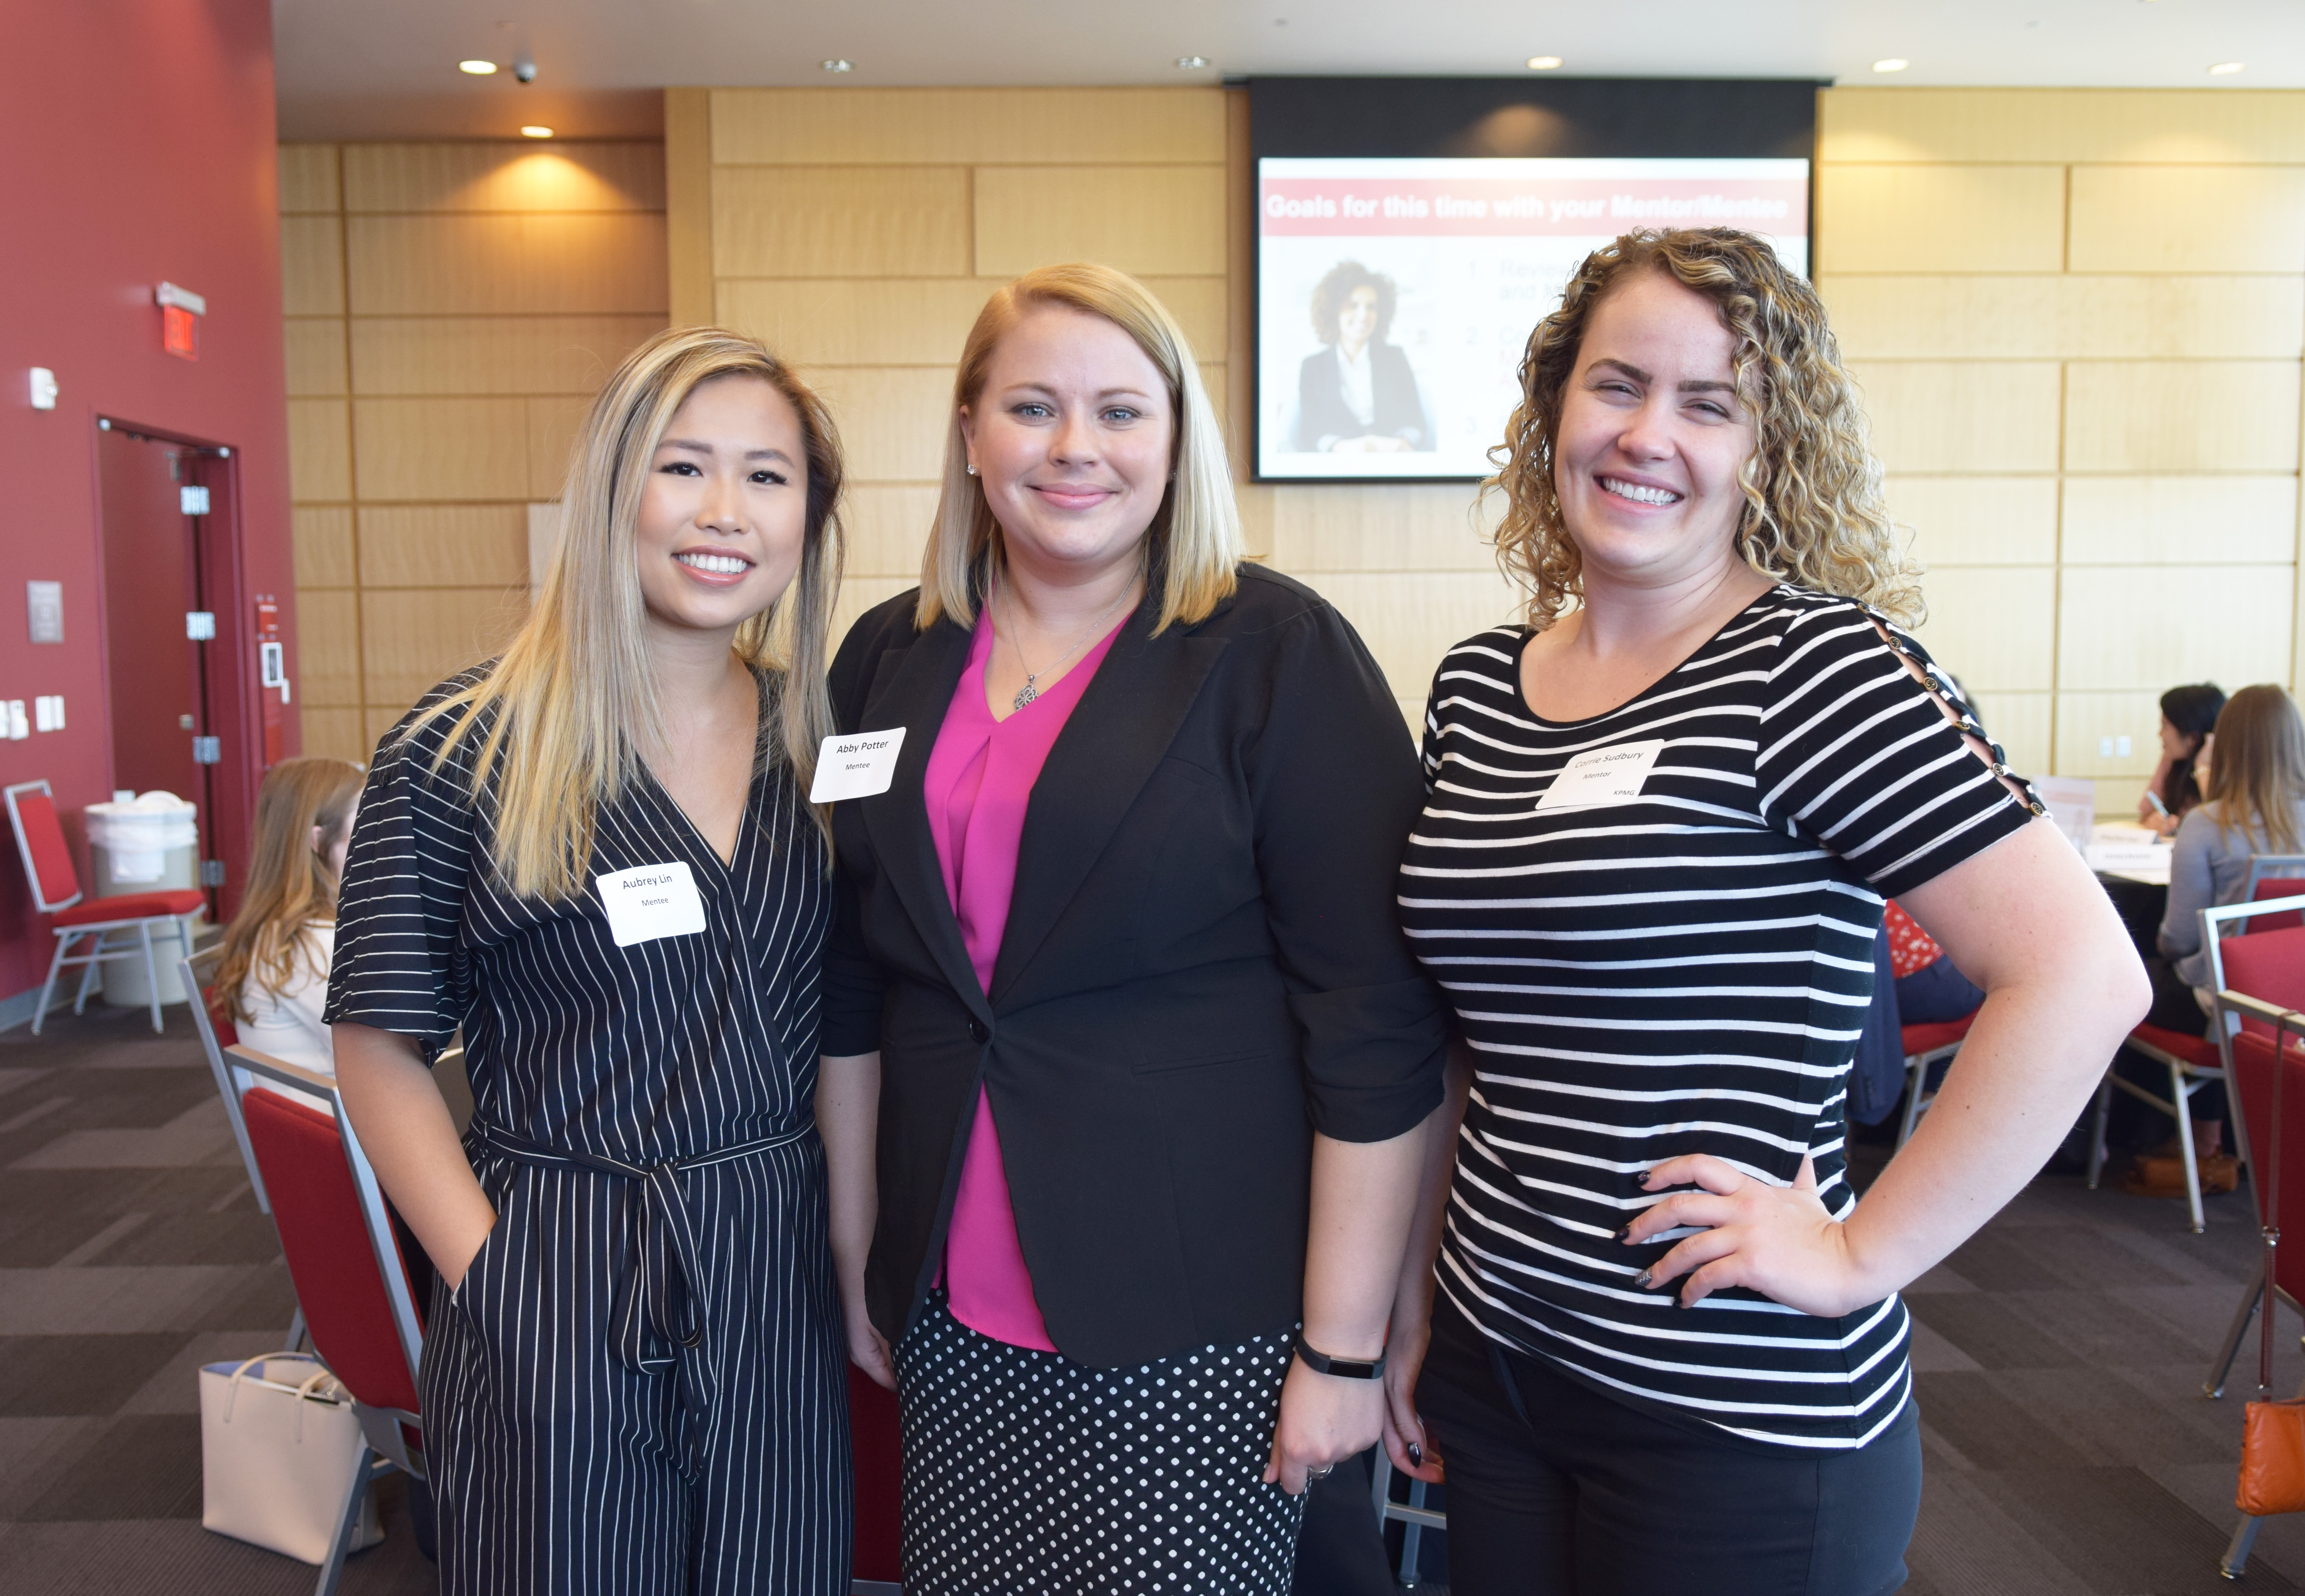 MAcc Women's Mentoring Program supports women as they build careers in accounting